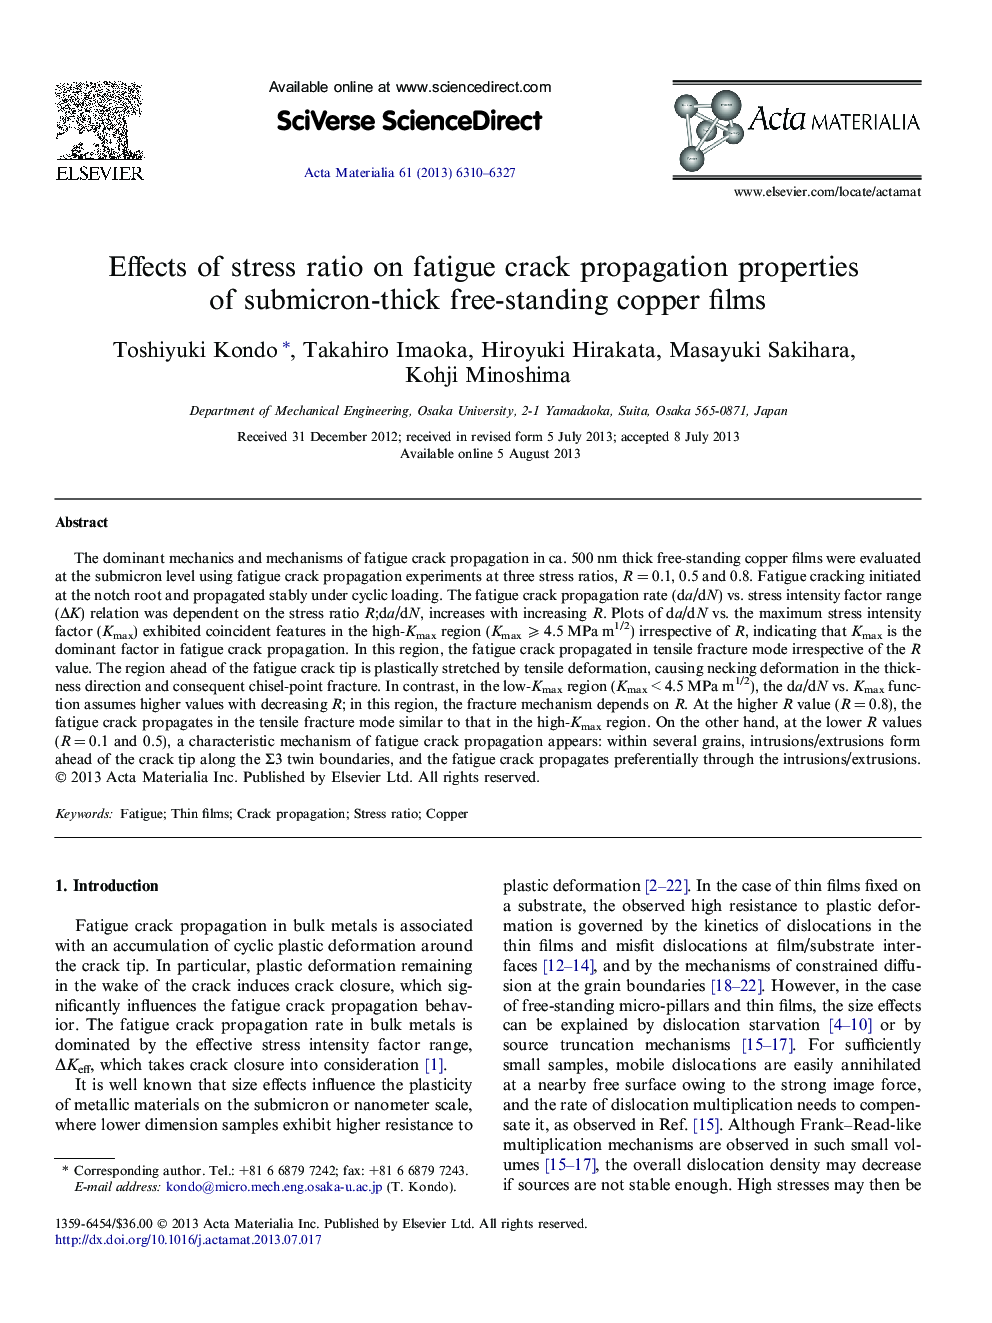 Effects of stress ratio on fatigue crack propagation properties of submicron-thick free-standing copper films